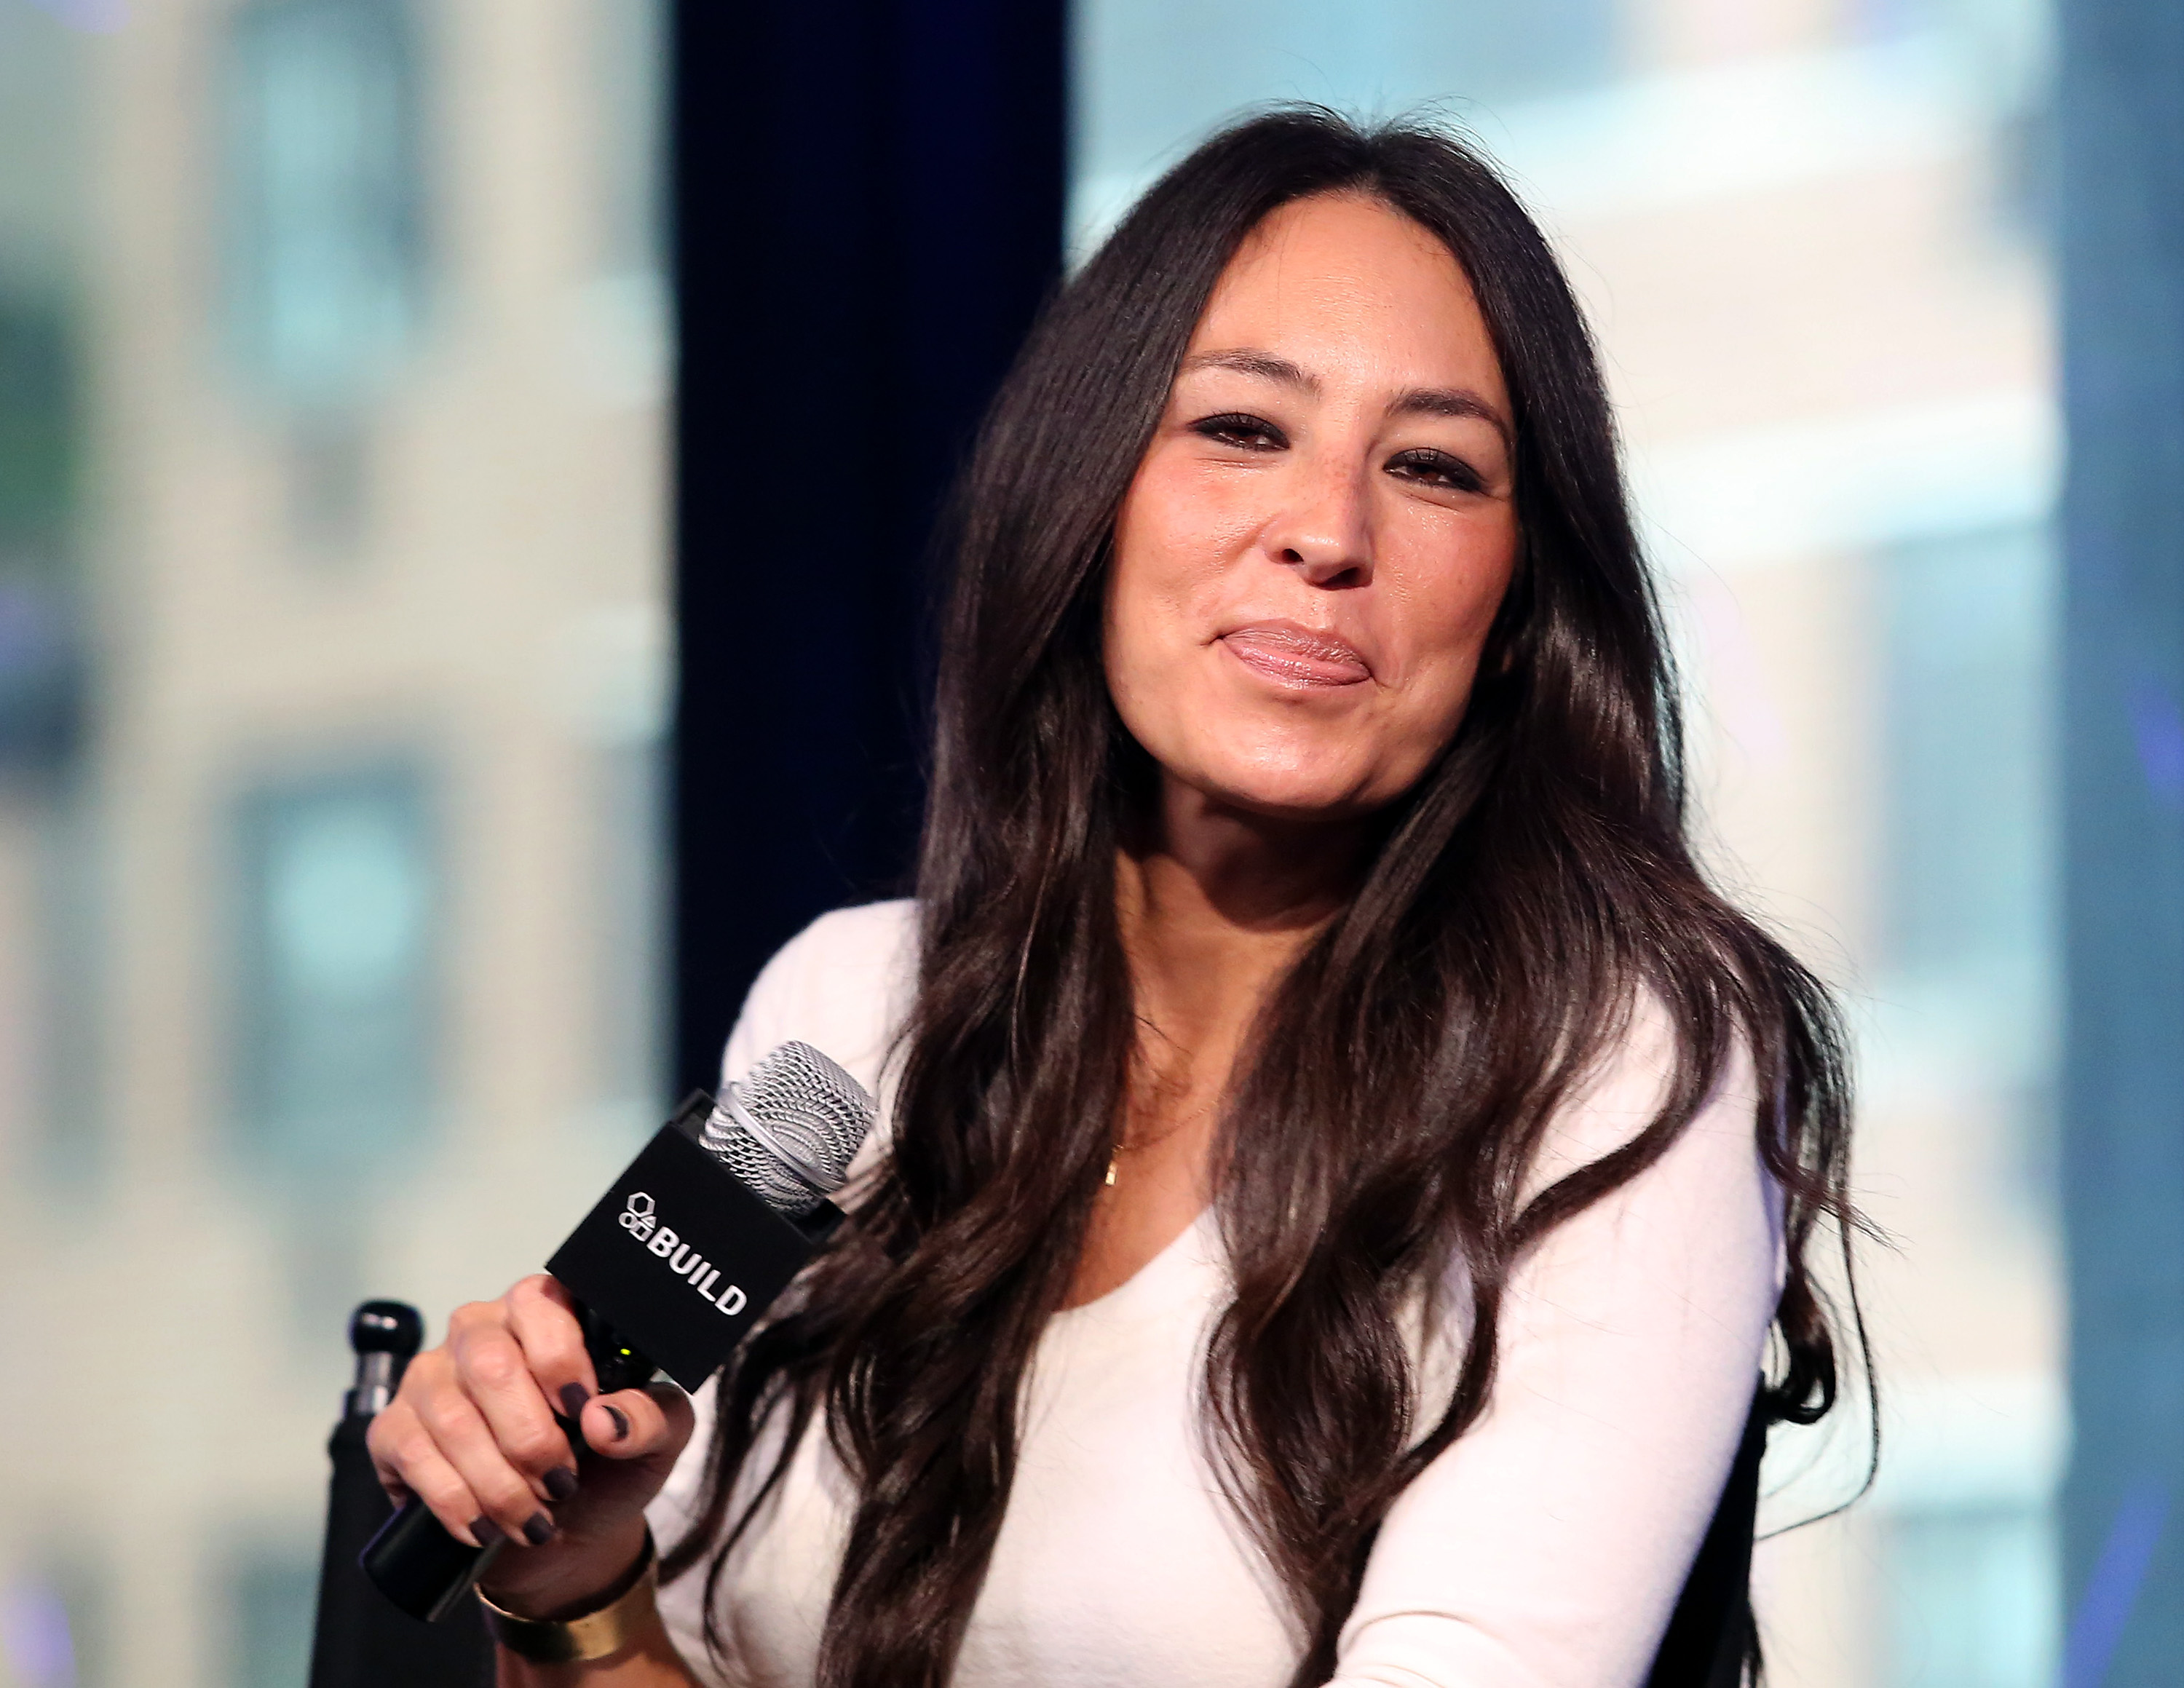 Joanna Gaines holds a microphone and smiles